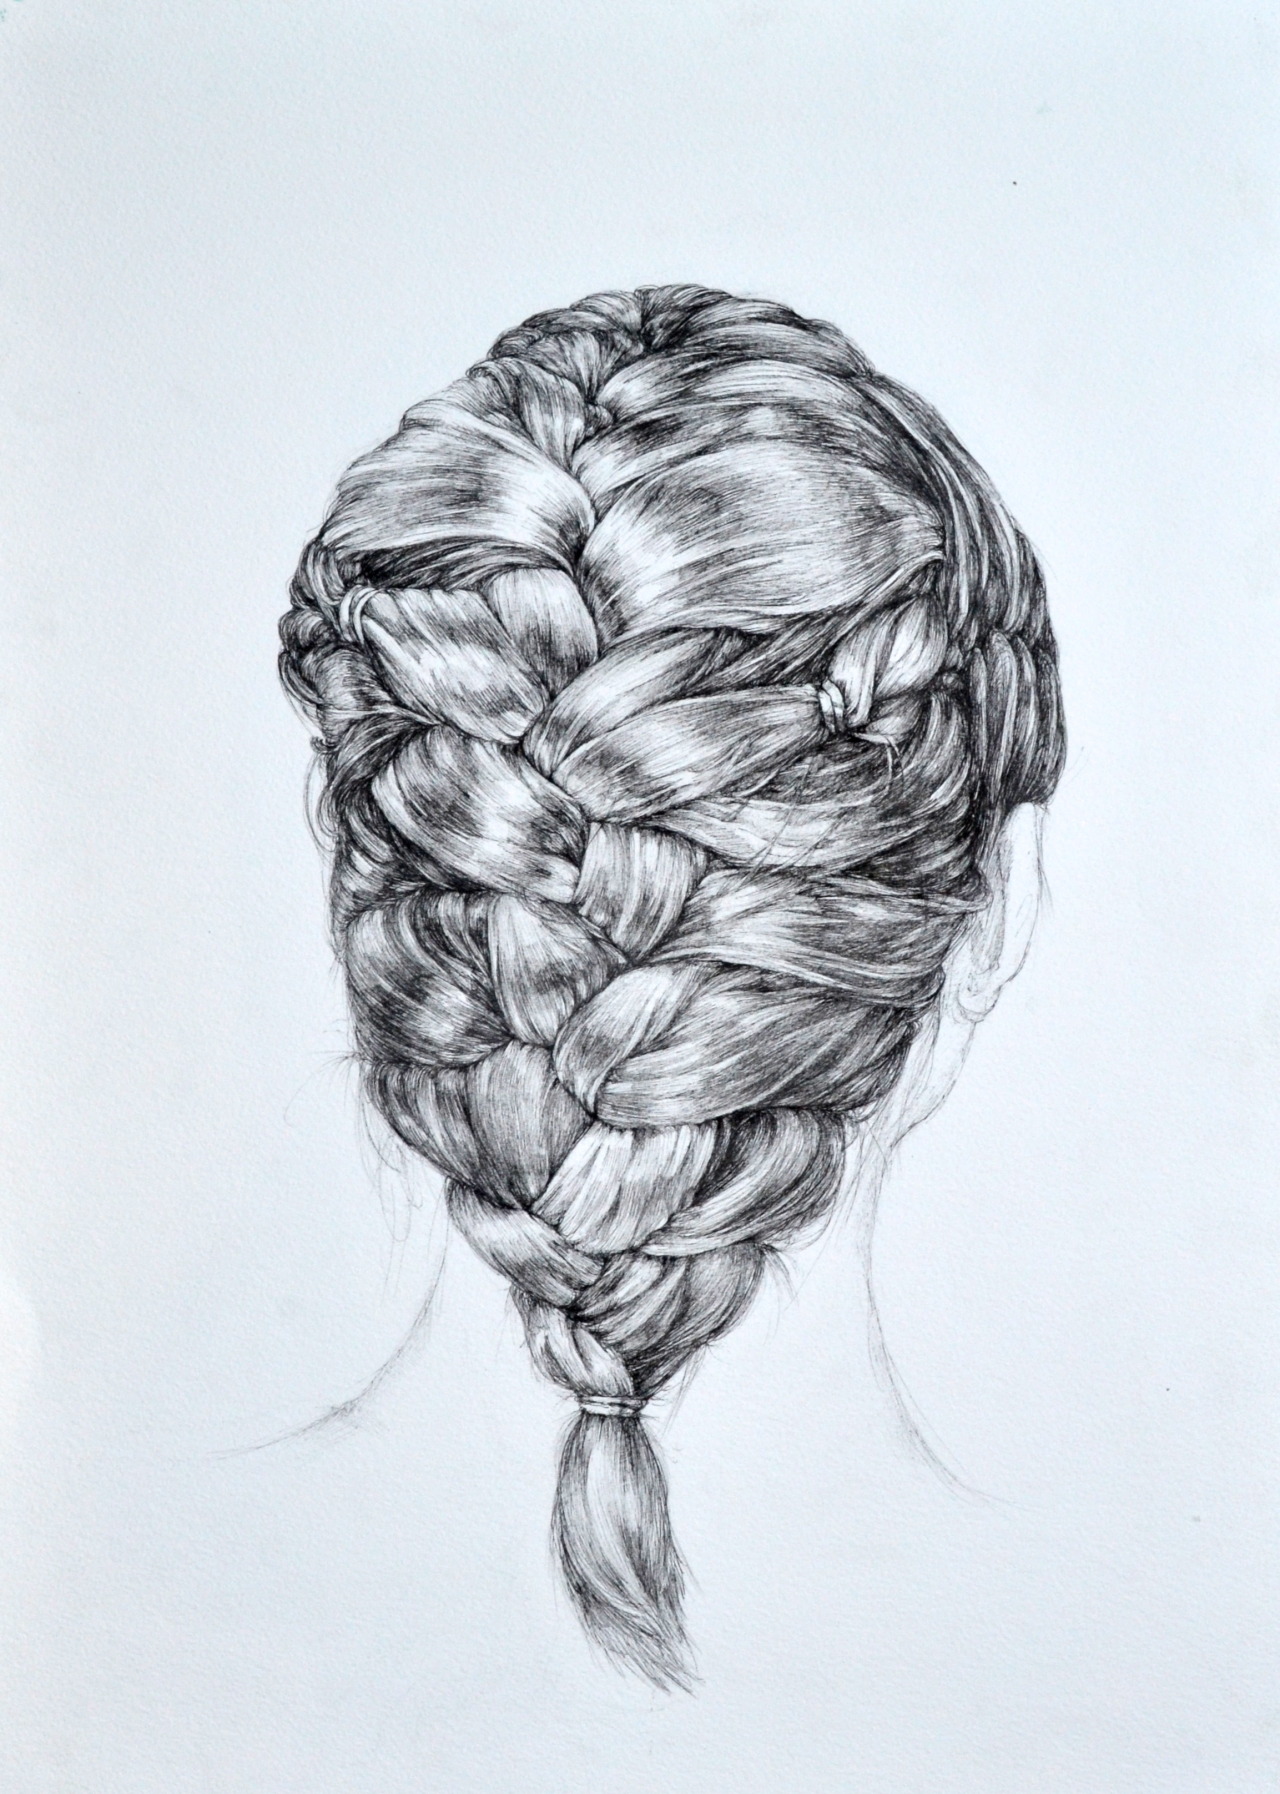 Hair study. to see more works ( + follow me ) at www.thepufflins.tumblr.com